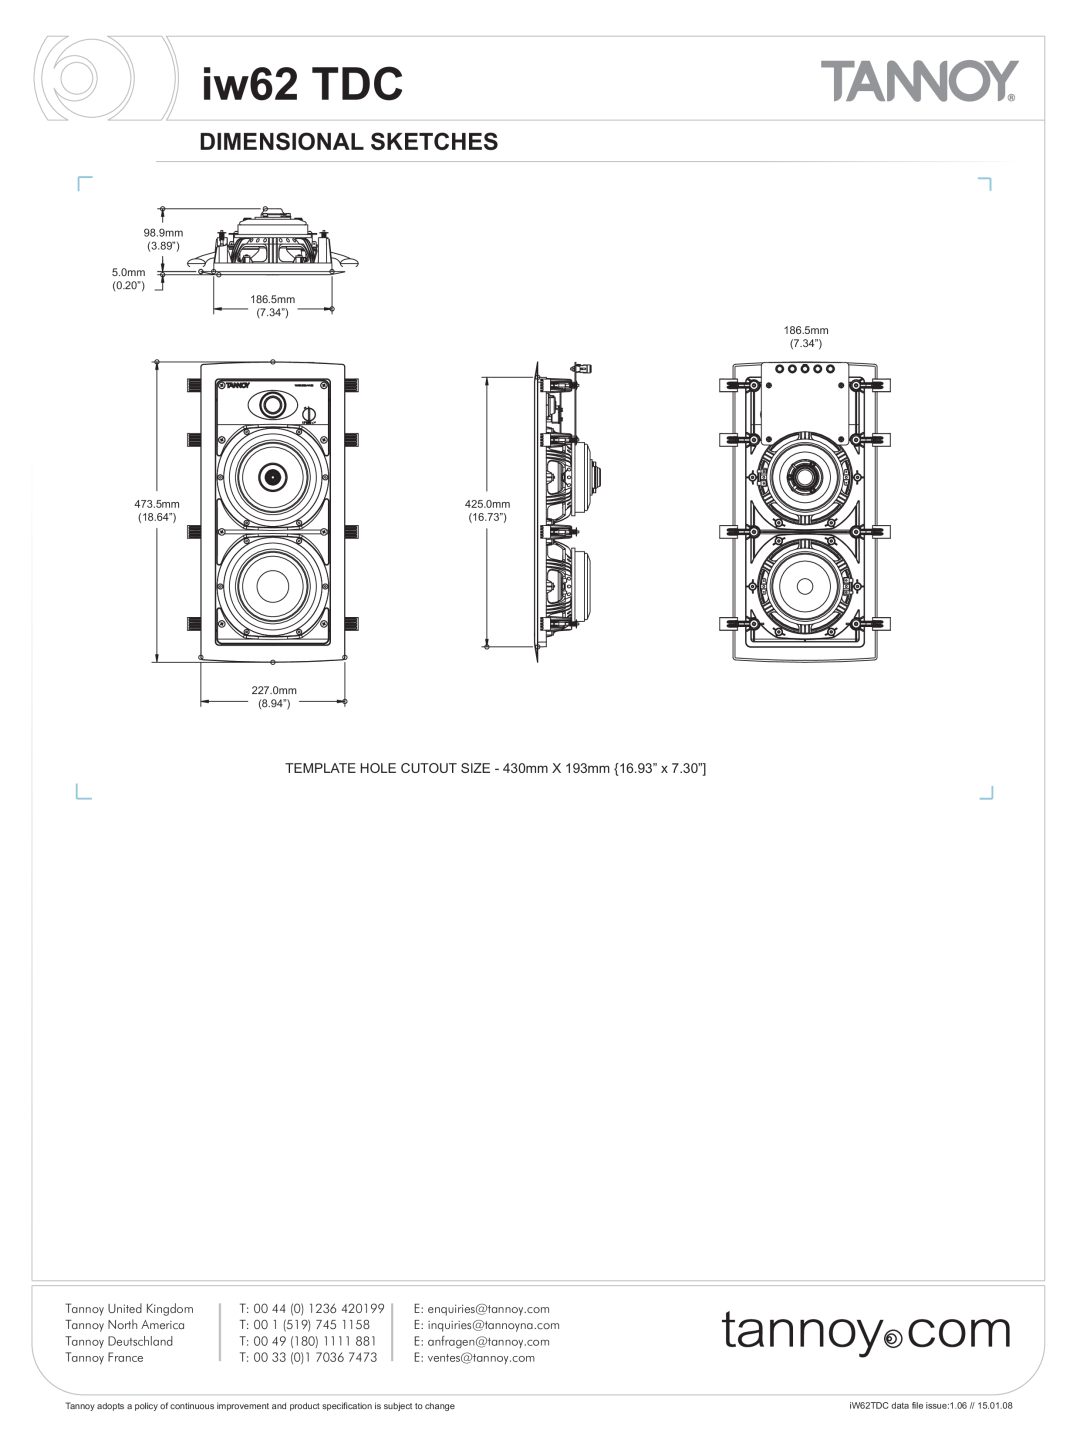 Tannoy iw62 TDC warranty Dimensional Sketches, 5.0mm 0.52.0” 0.20 186186.5mm.5, 186.5mm 7.34”, 473473.5mm.5 18 ..64” 